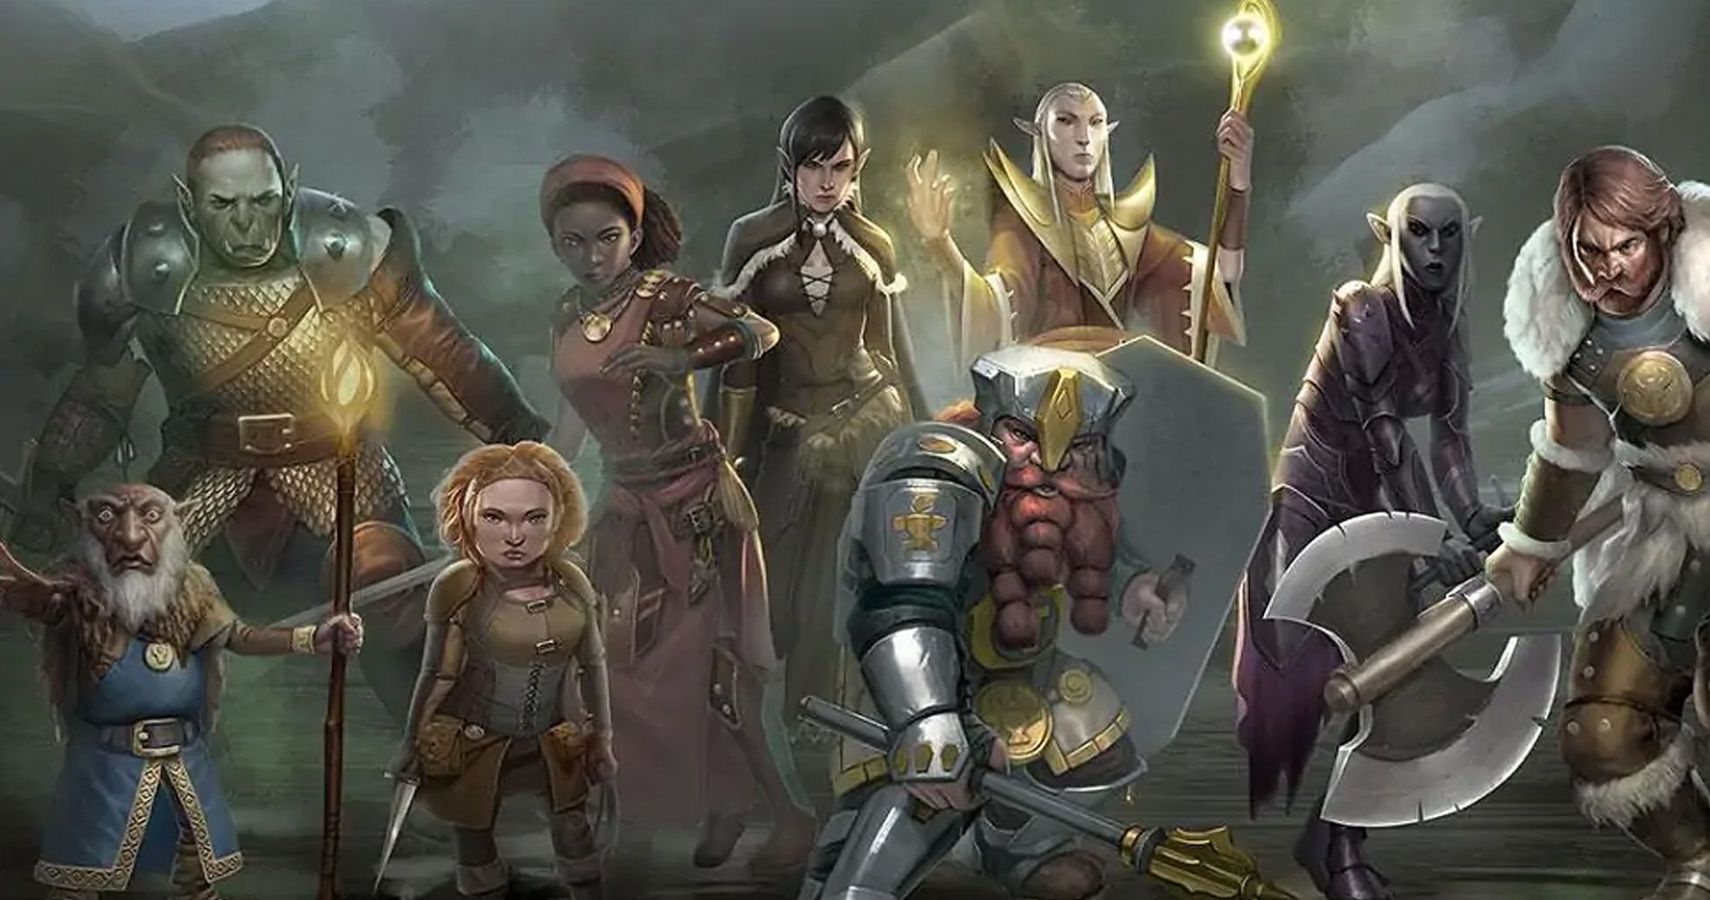 dnd 5e character builder for eldritch knight